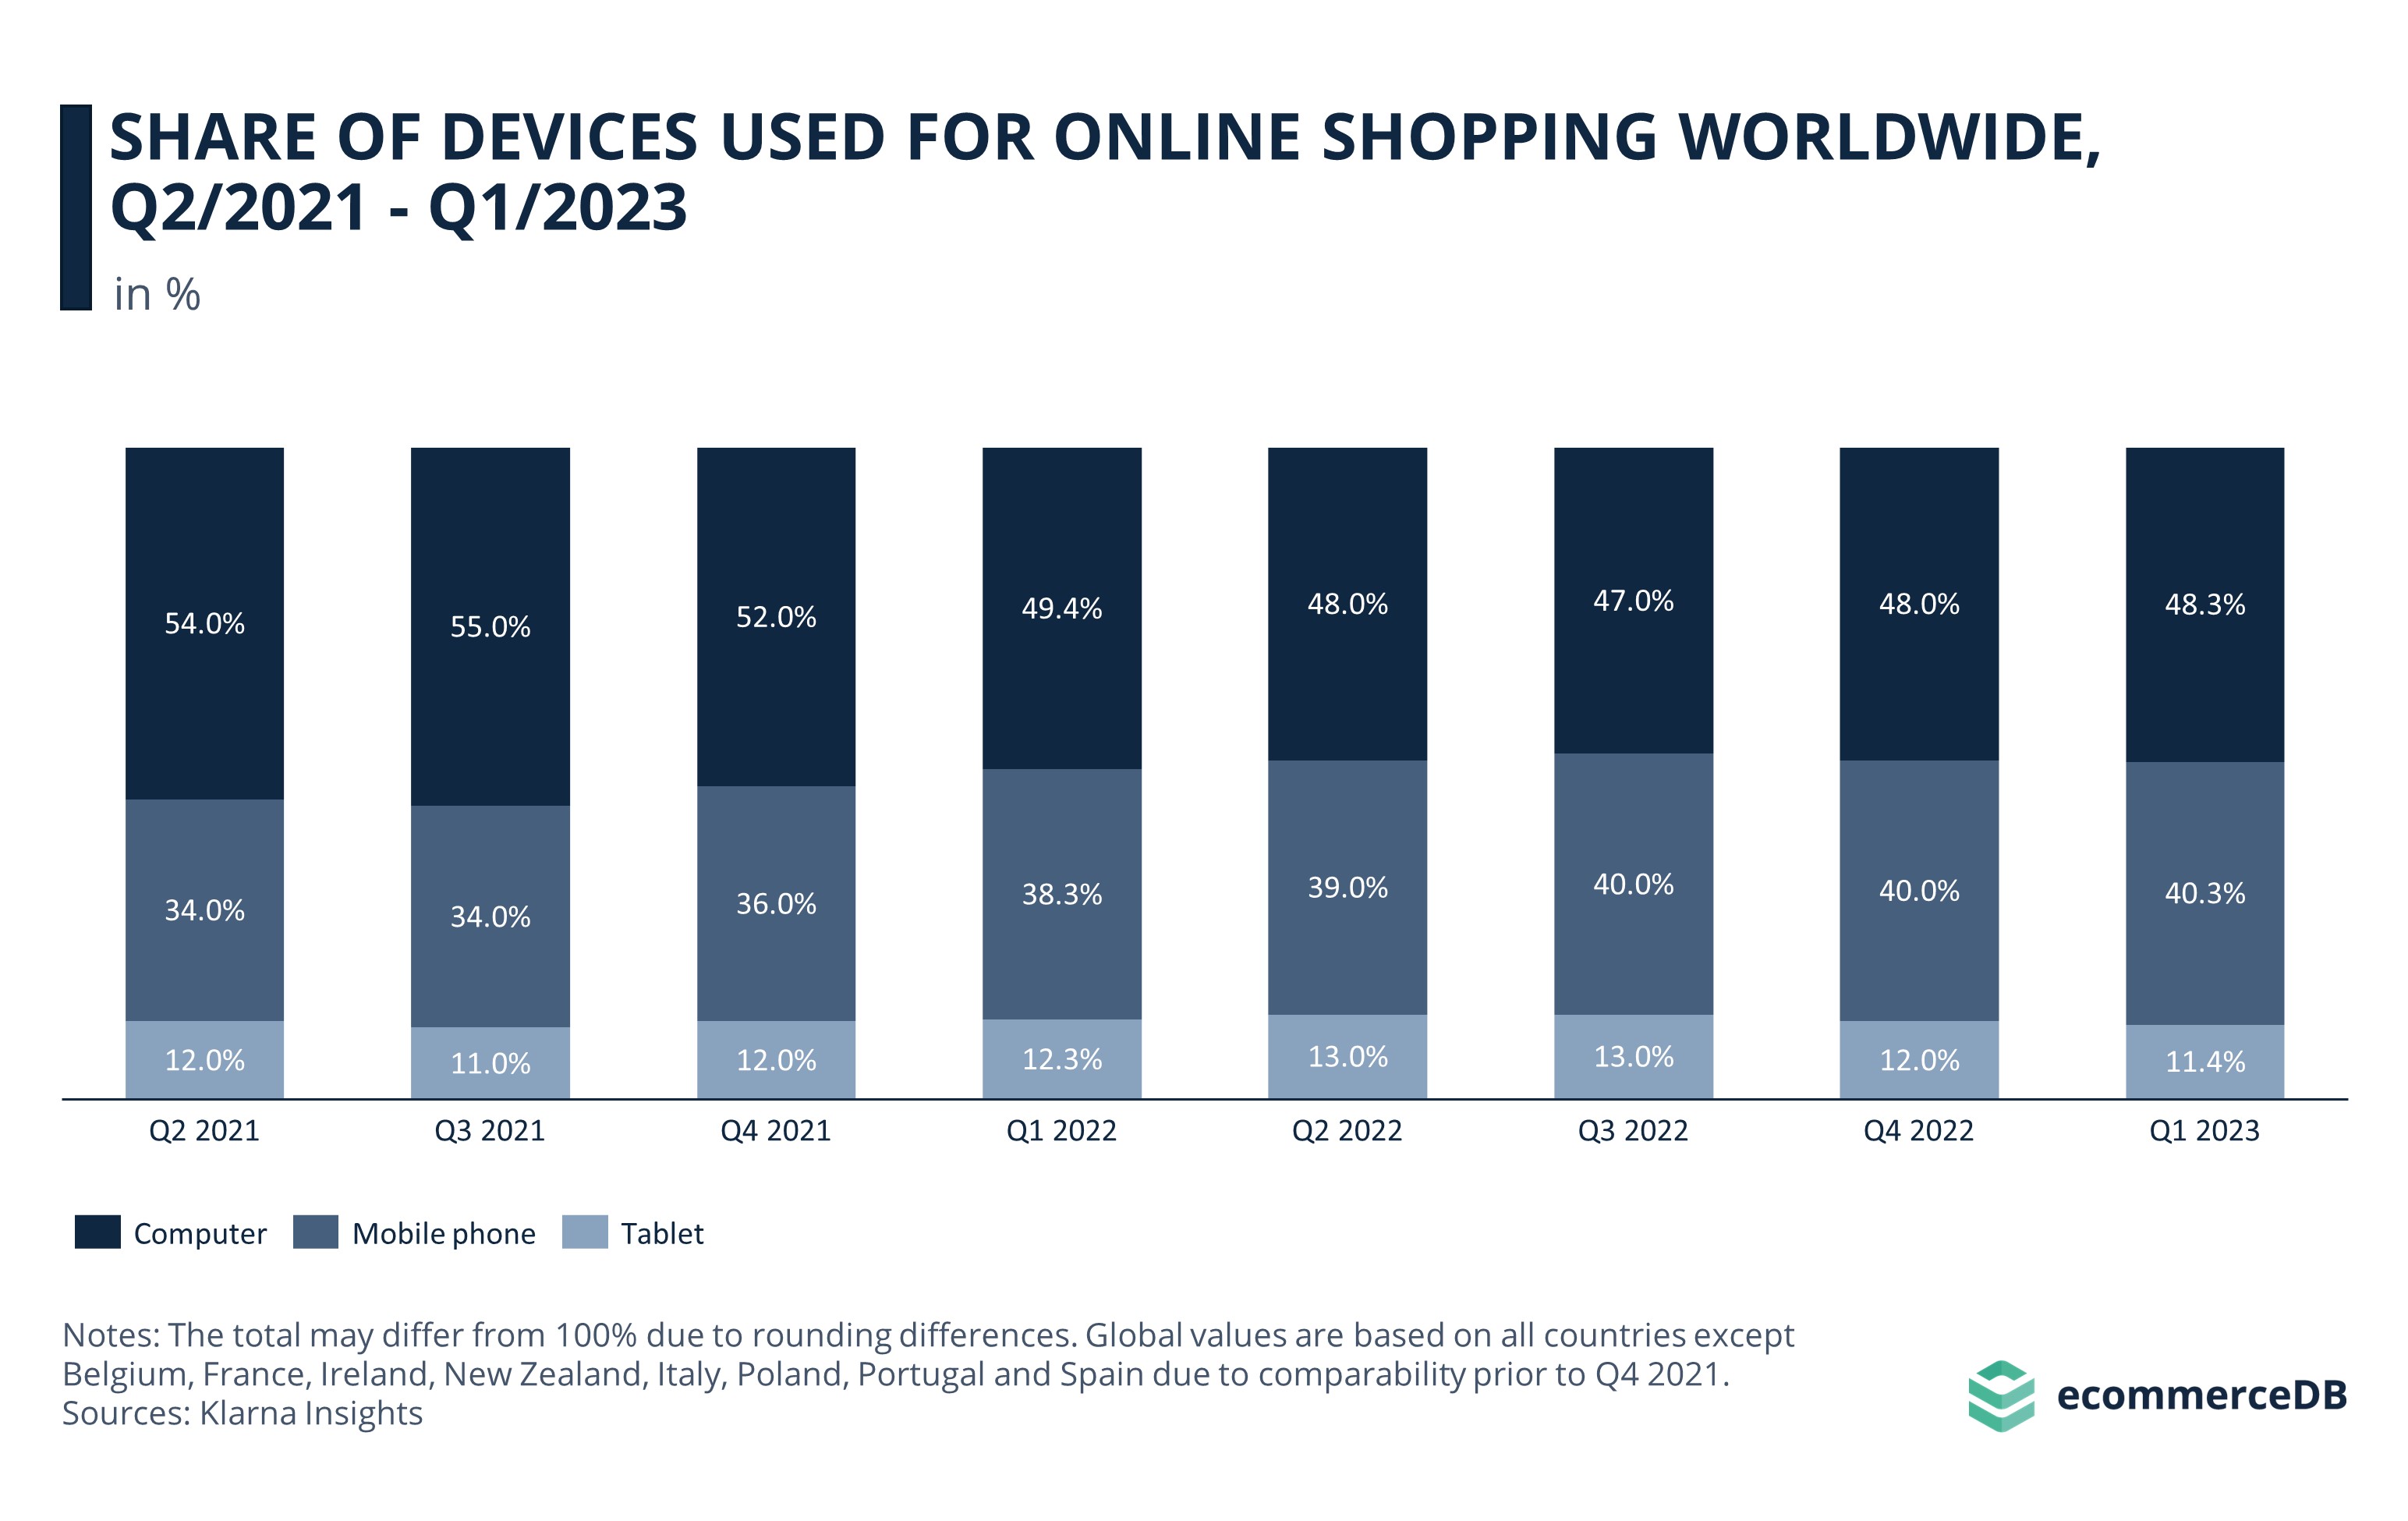 Share of devices used for online shopping worldwide, Q2-2021 to Q1-2023